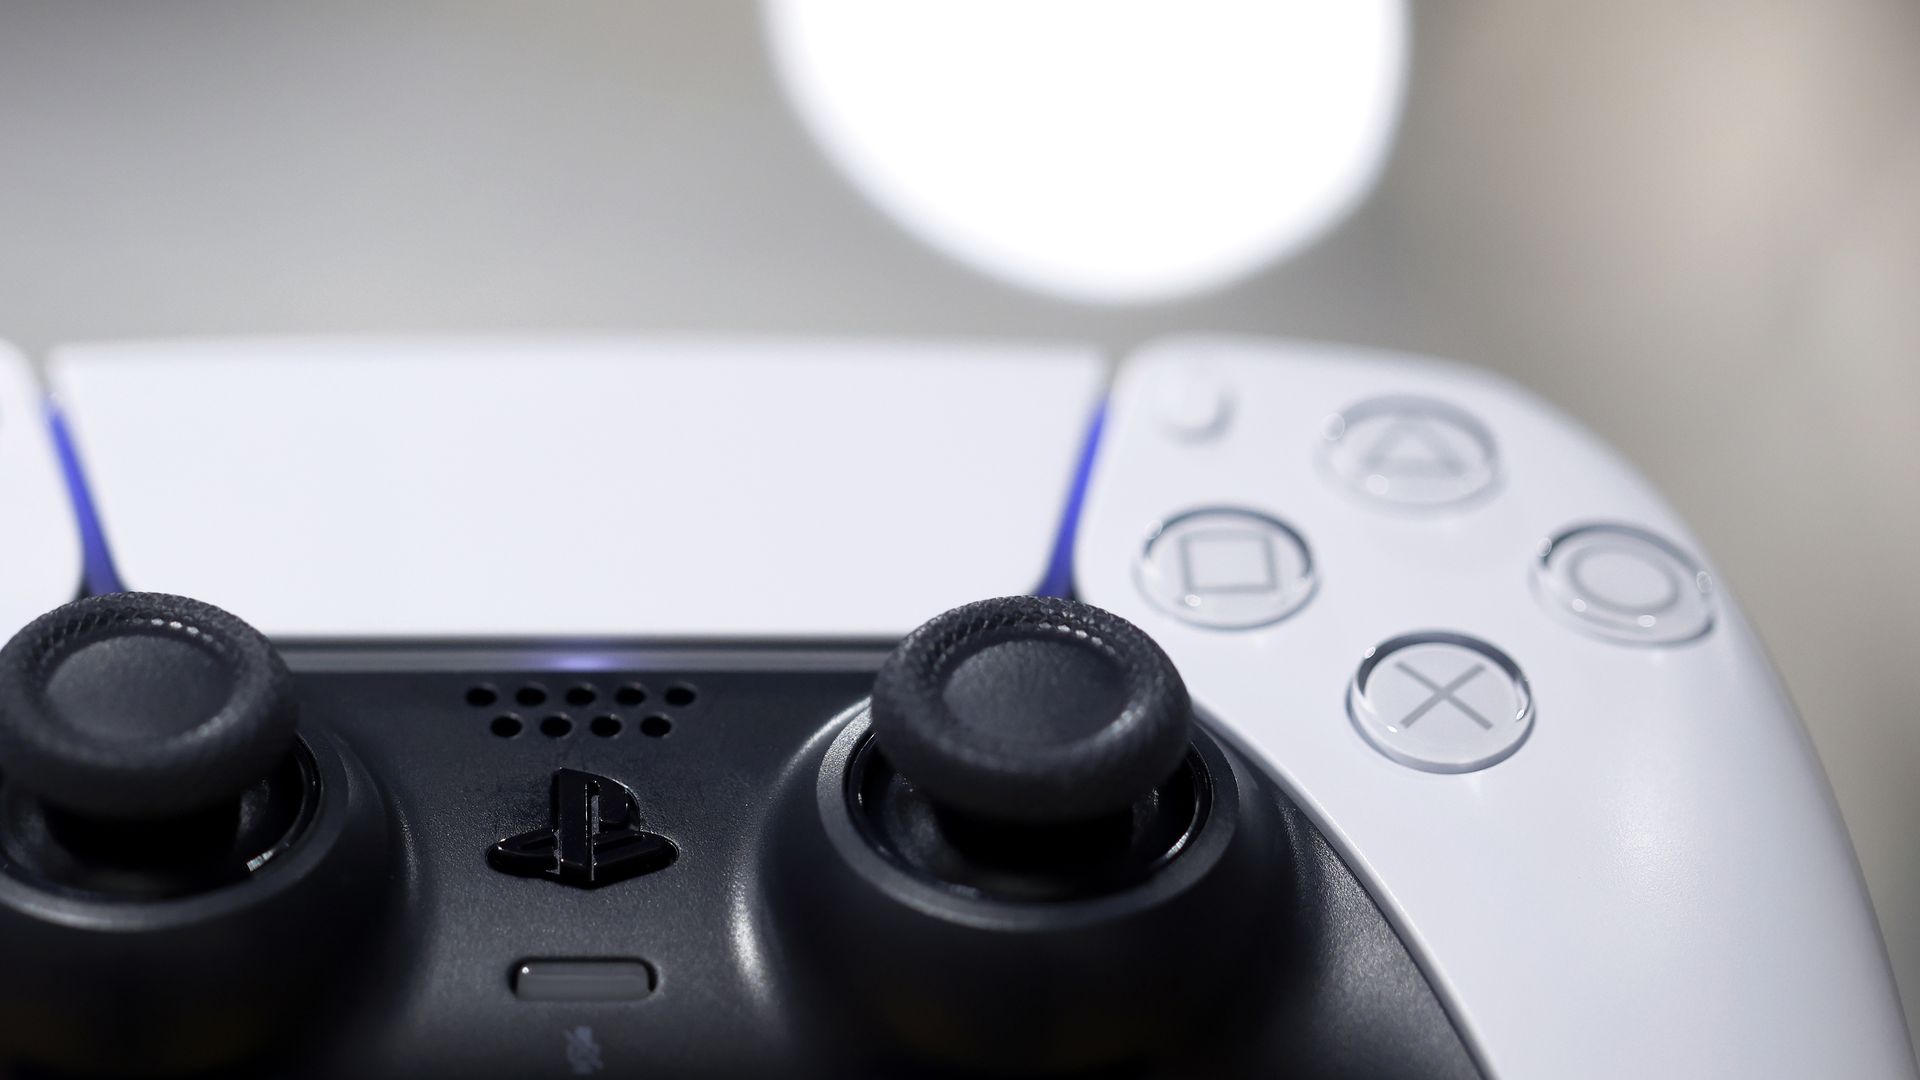 Close-up photograph of a white PlayStation 5 controller